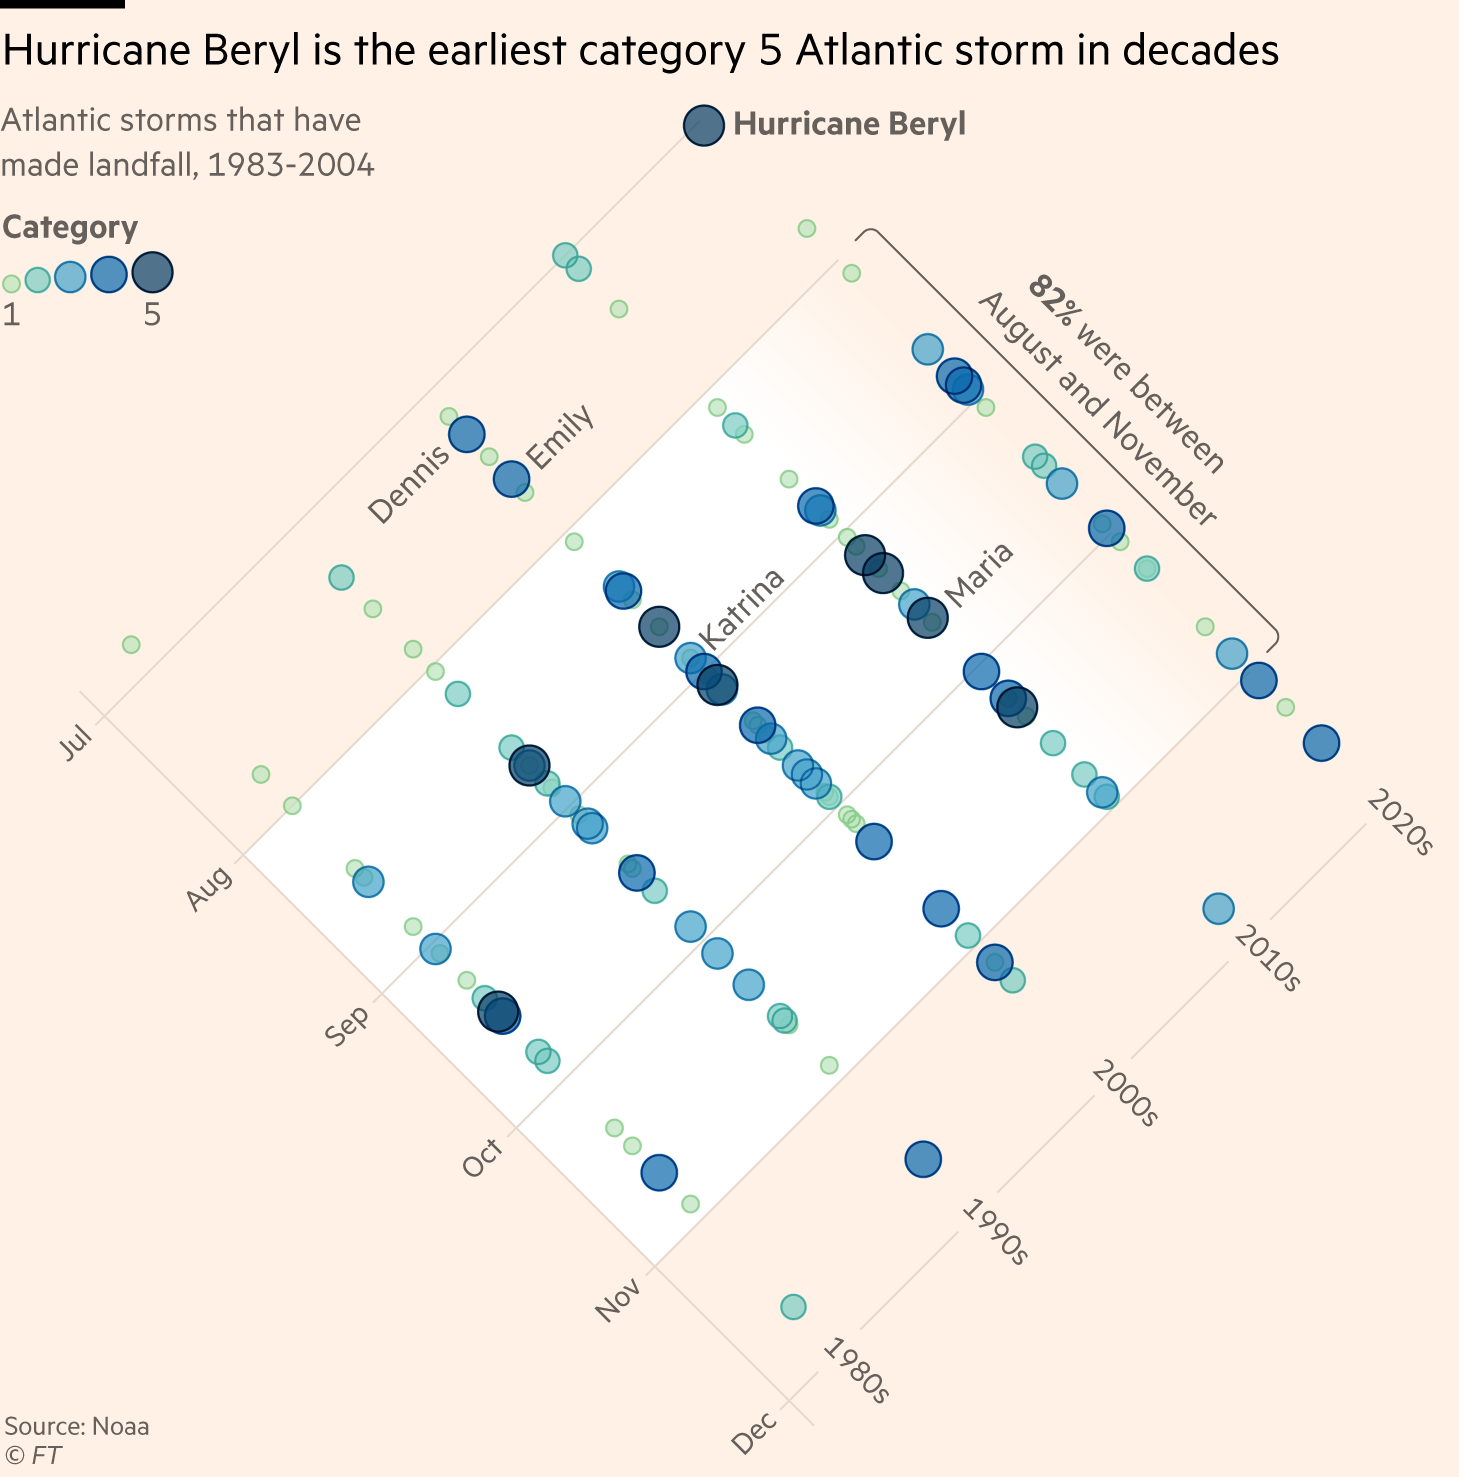 Scatter plot of Atlantic storms that have made landfall between 1983 and 2004, showing that Hurricane Beryl is the earliest category 5 Atlantic storm in decades, according to data from the U.S. National Oceanic and Atmospheric Administration. 82% of storms were between August and November.